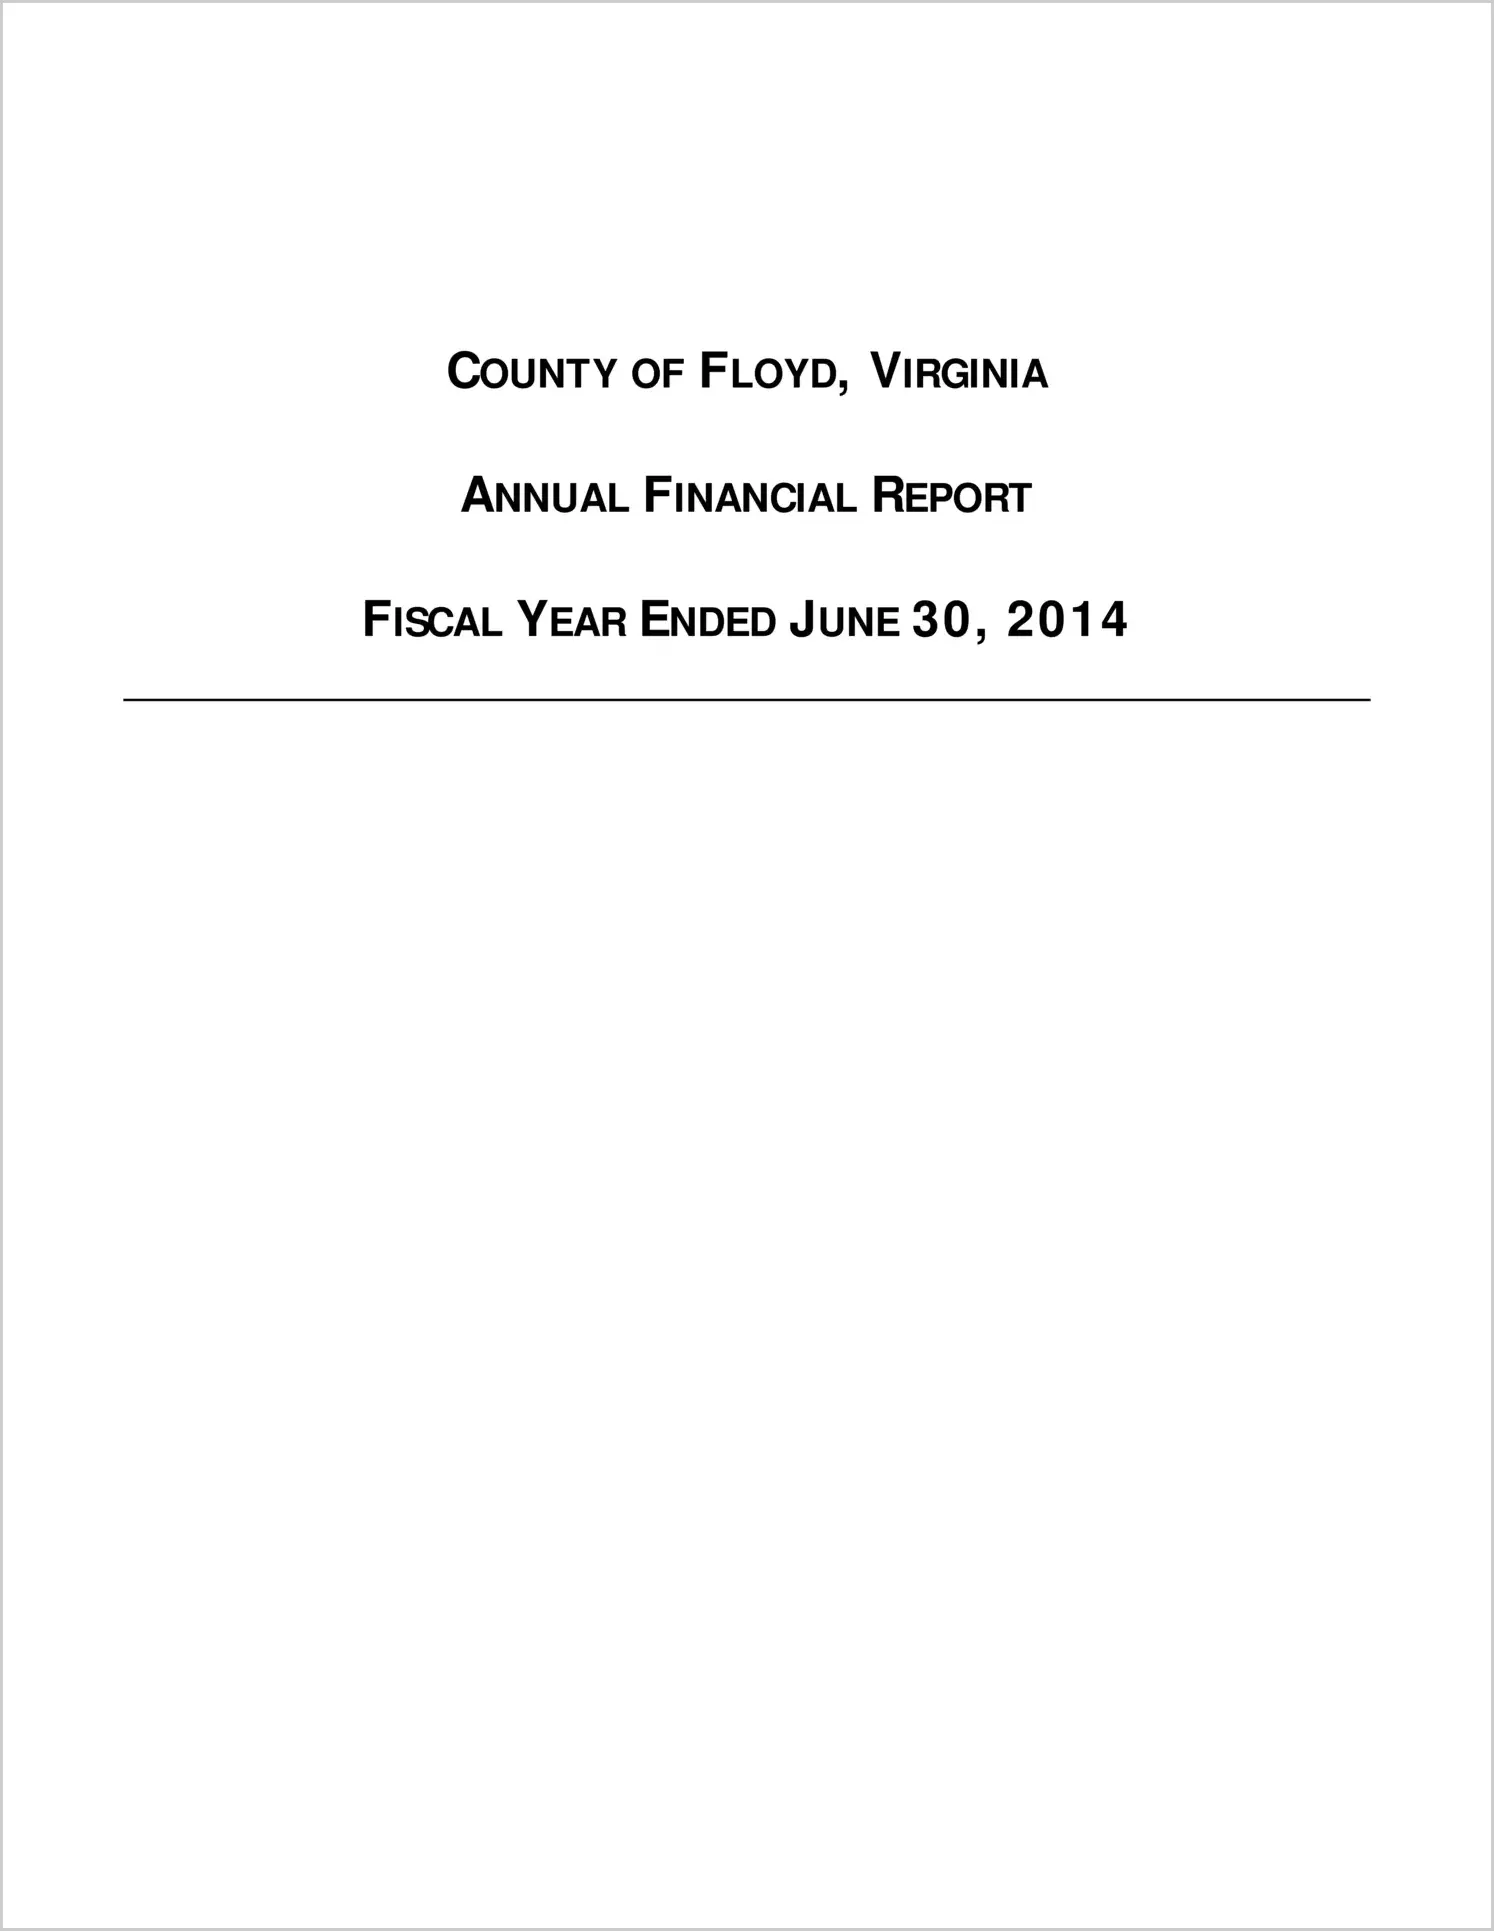 2014 Annual Financial Report for County of Floyd